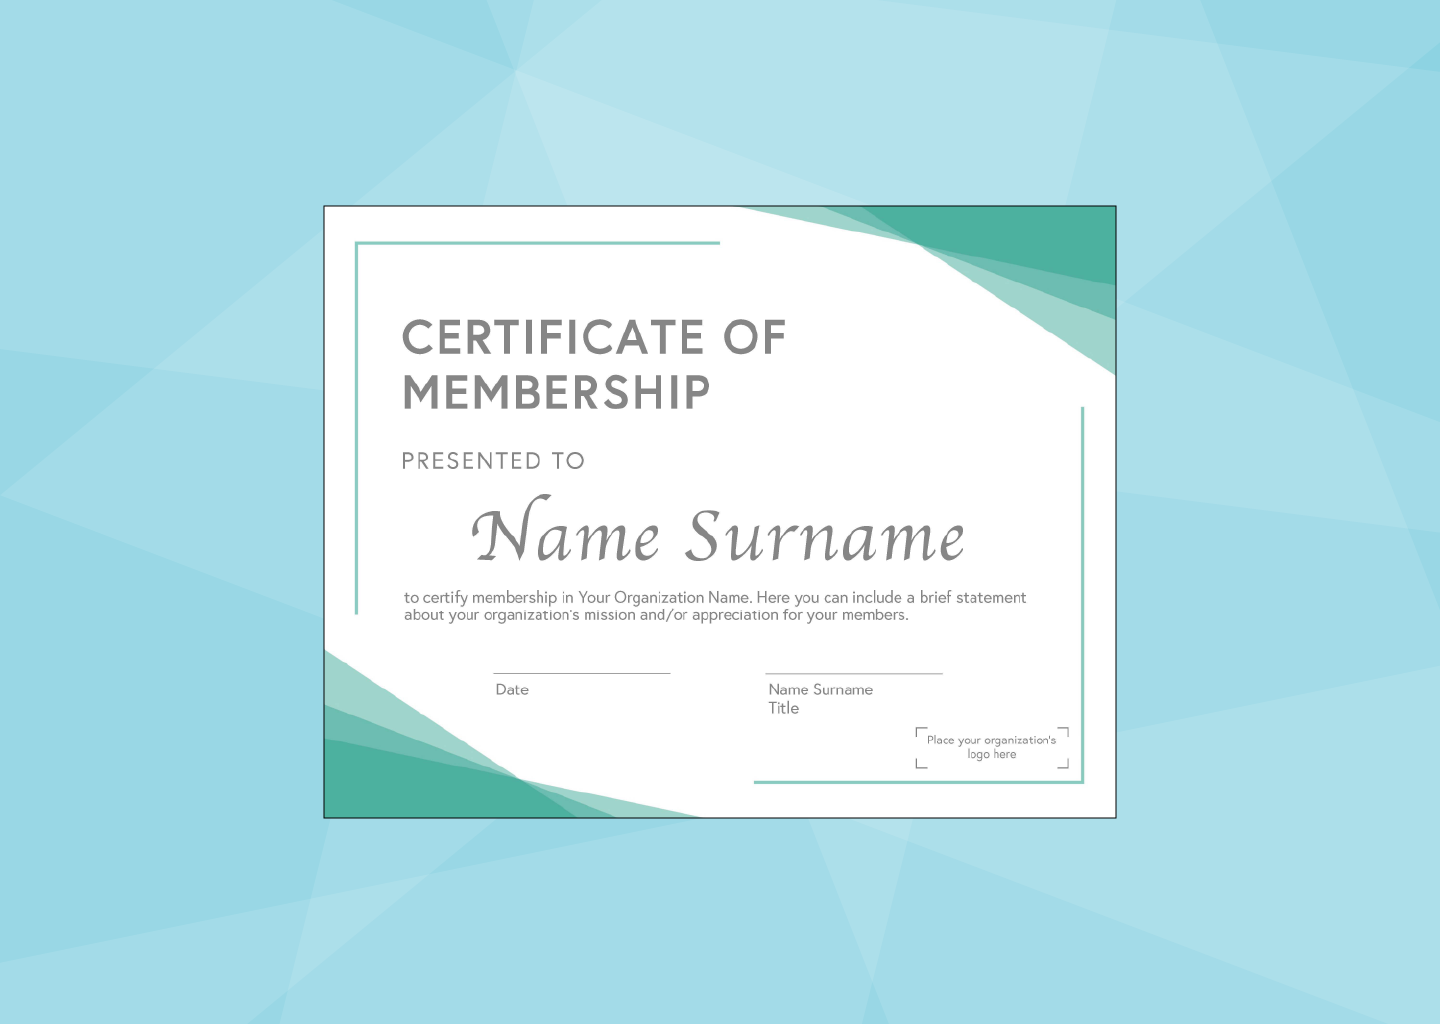 How to Make a Certificate in Microsoft Word + a FREE Template